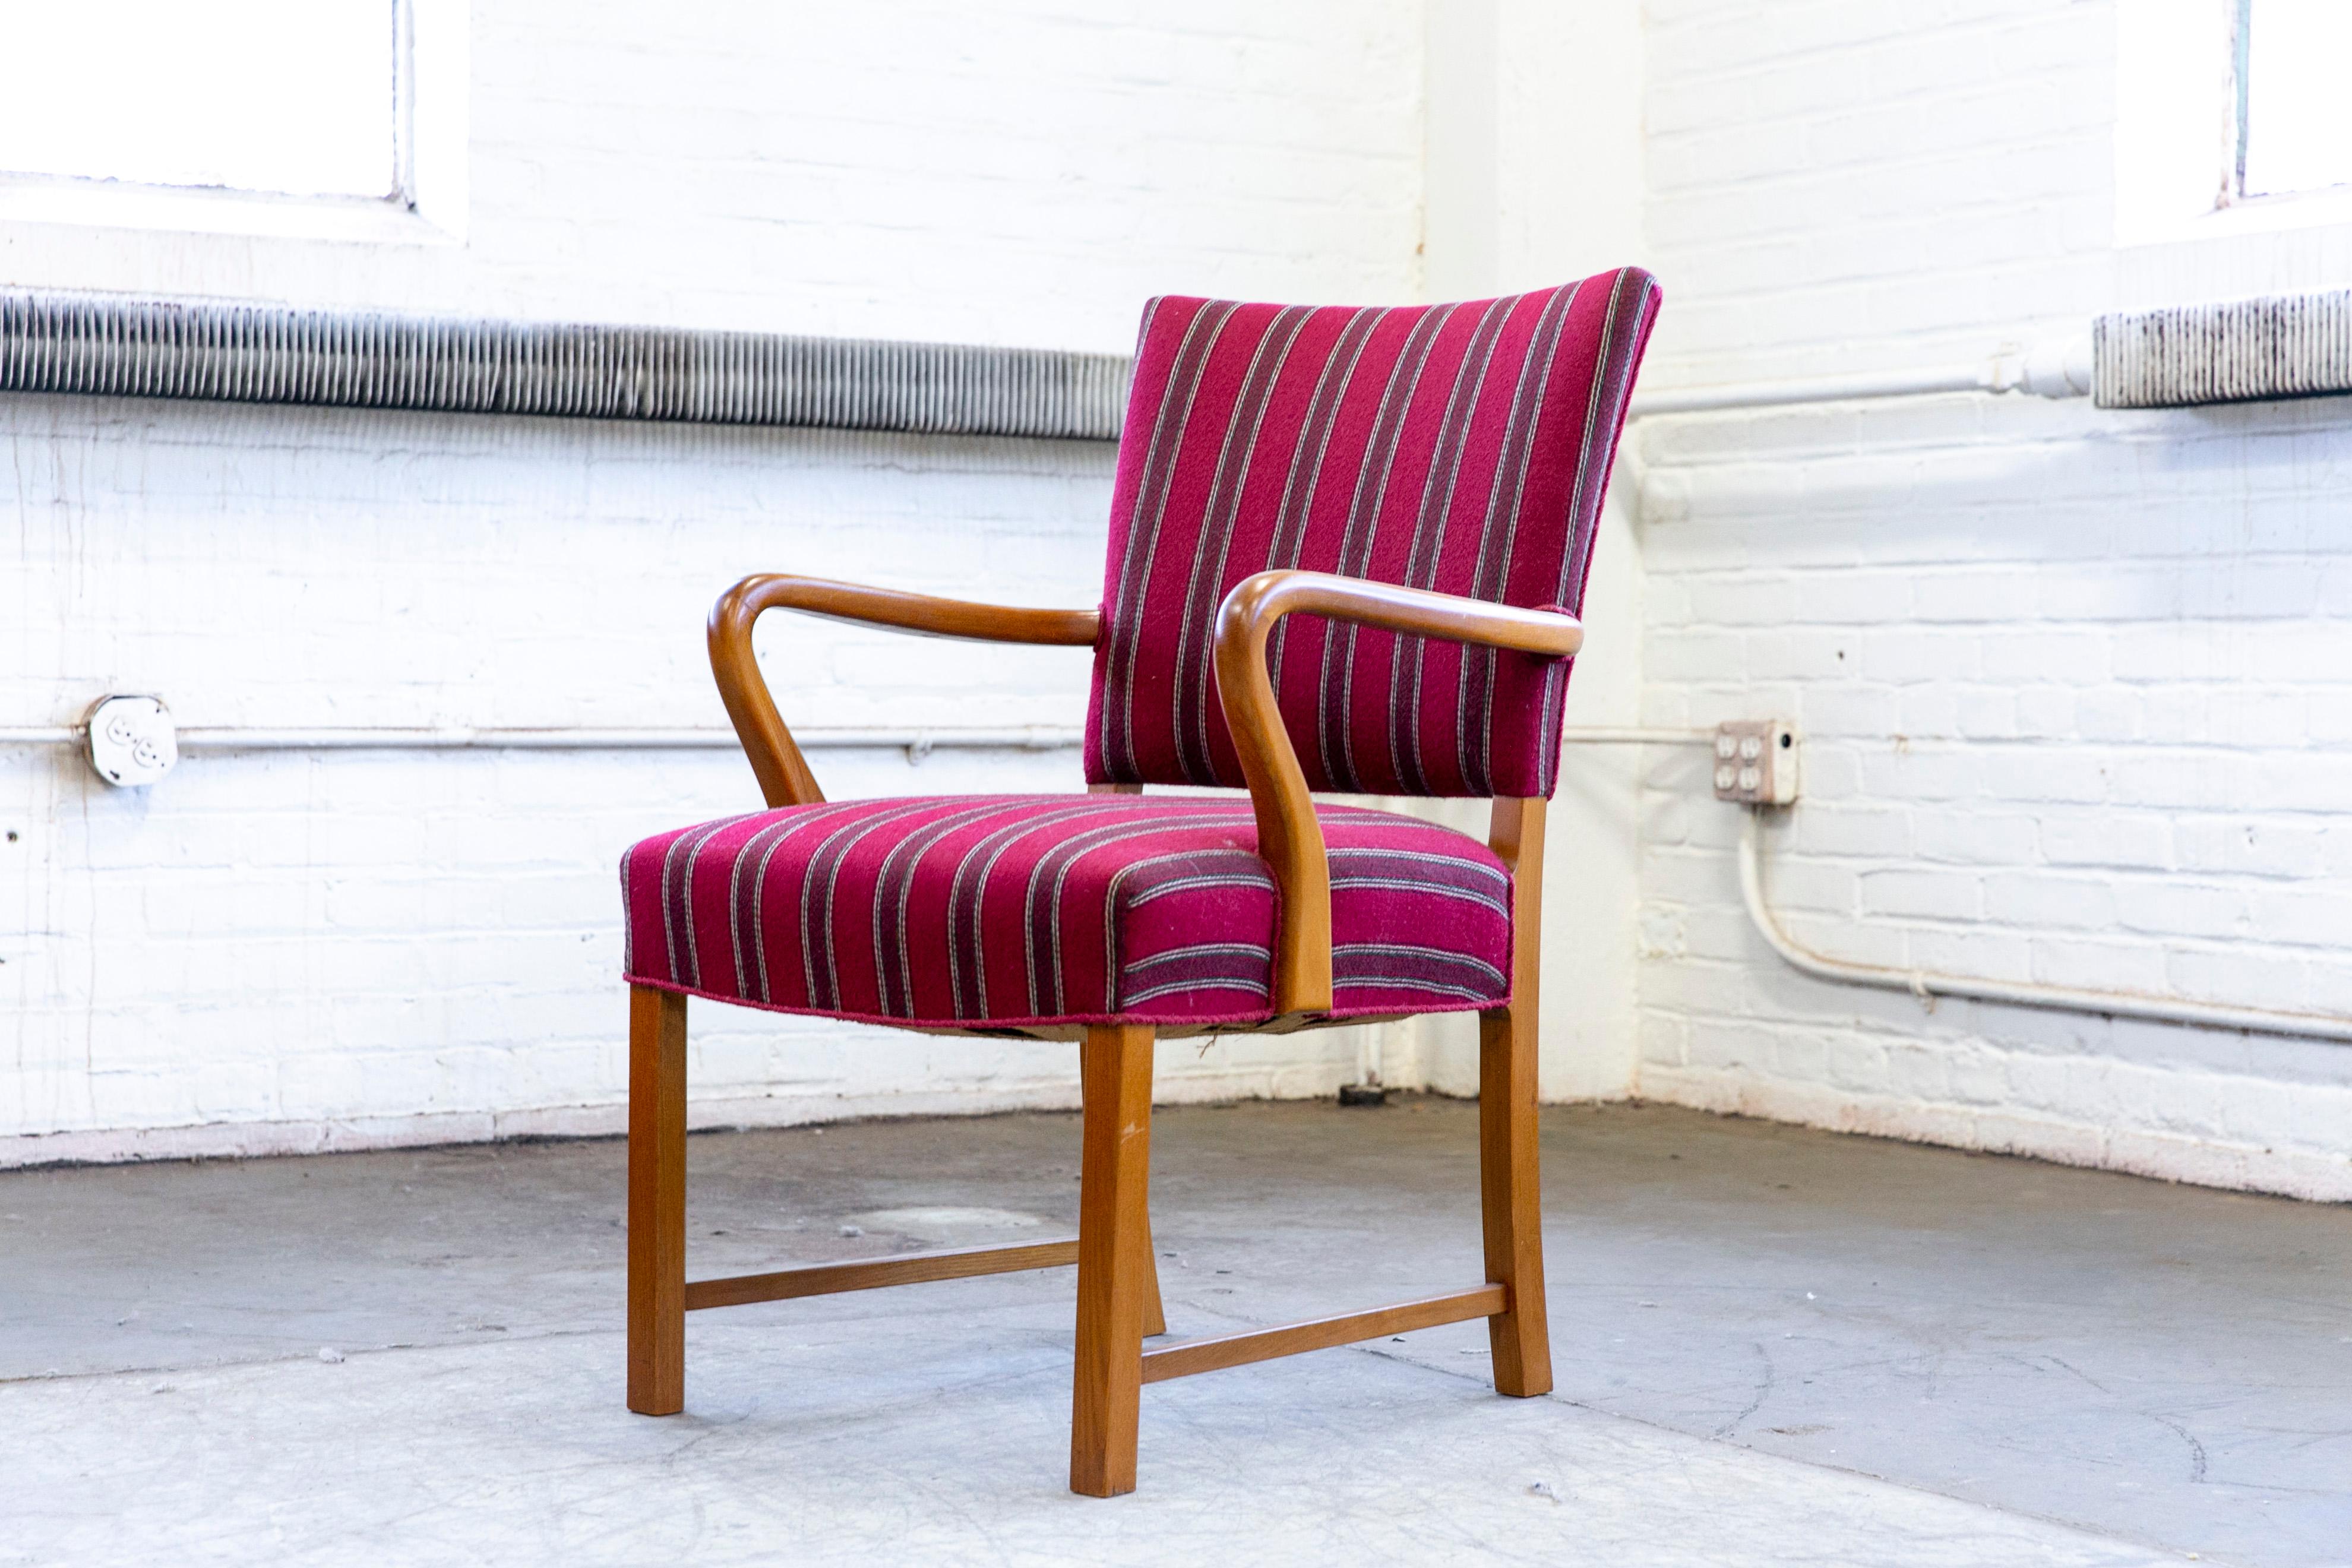 Classic elegant Danish high back armchair from the 1940s by Alfred Christensen for Slagelse Mobelvaerk with open armrests in beautifully curved mahogany stained beech. Nice slim elegant silhouette. Solid and sturdy construction with the fabric in